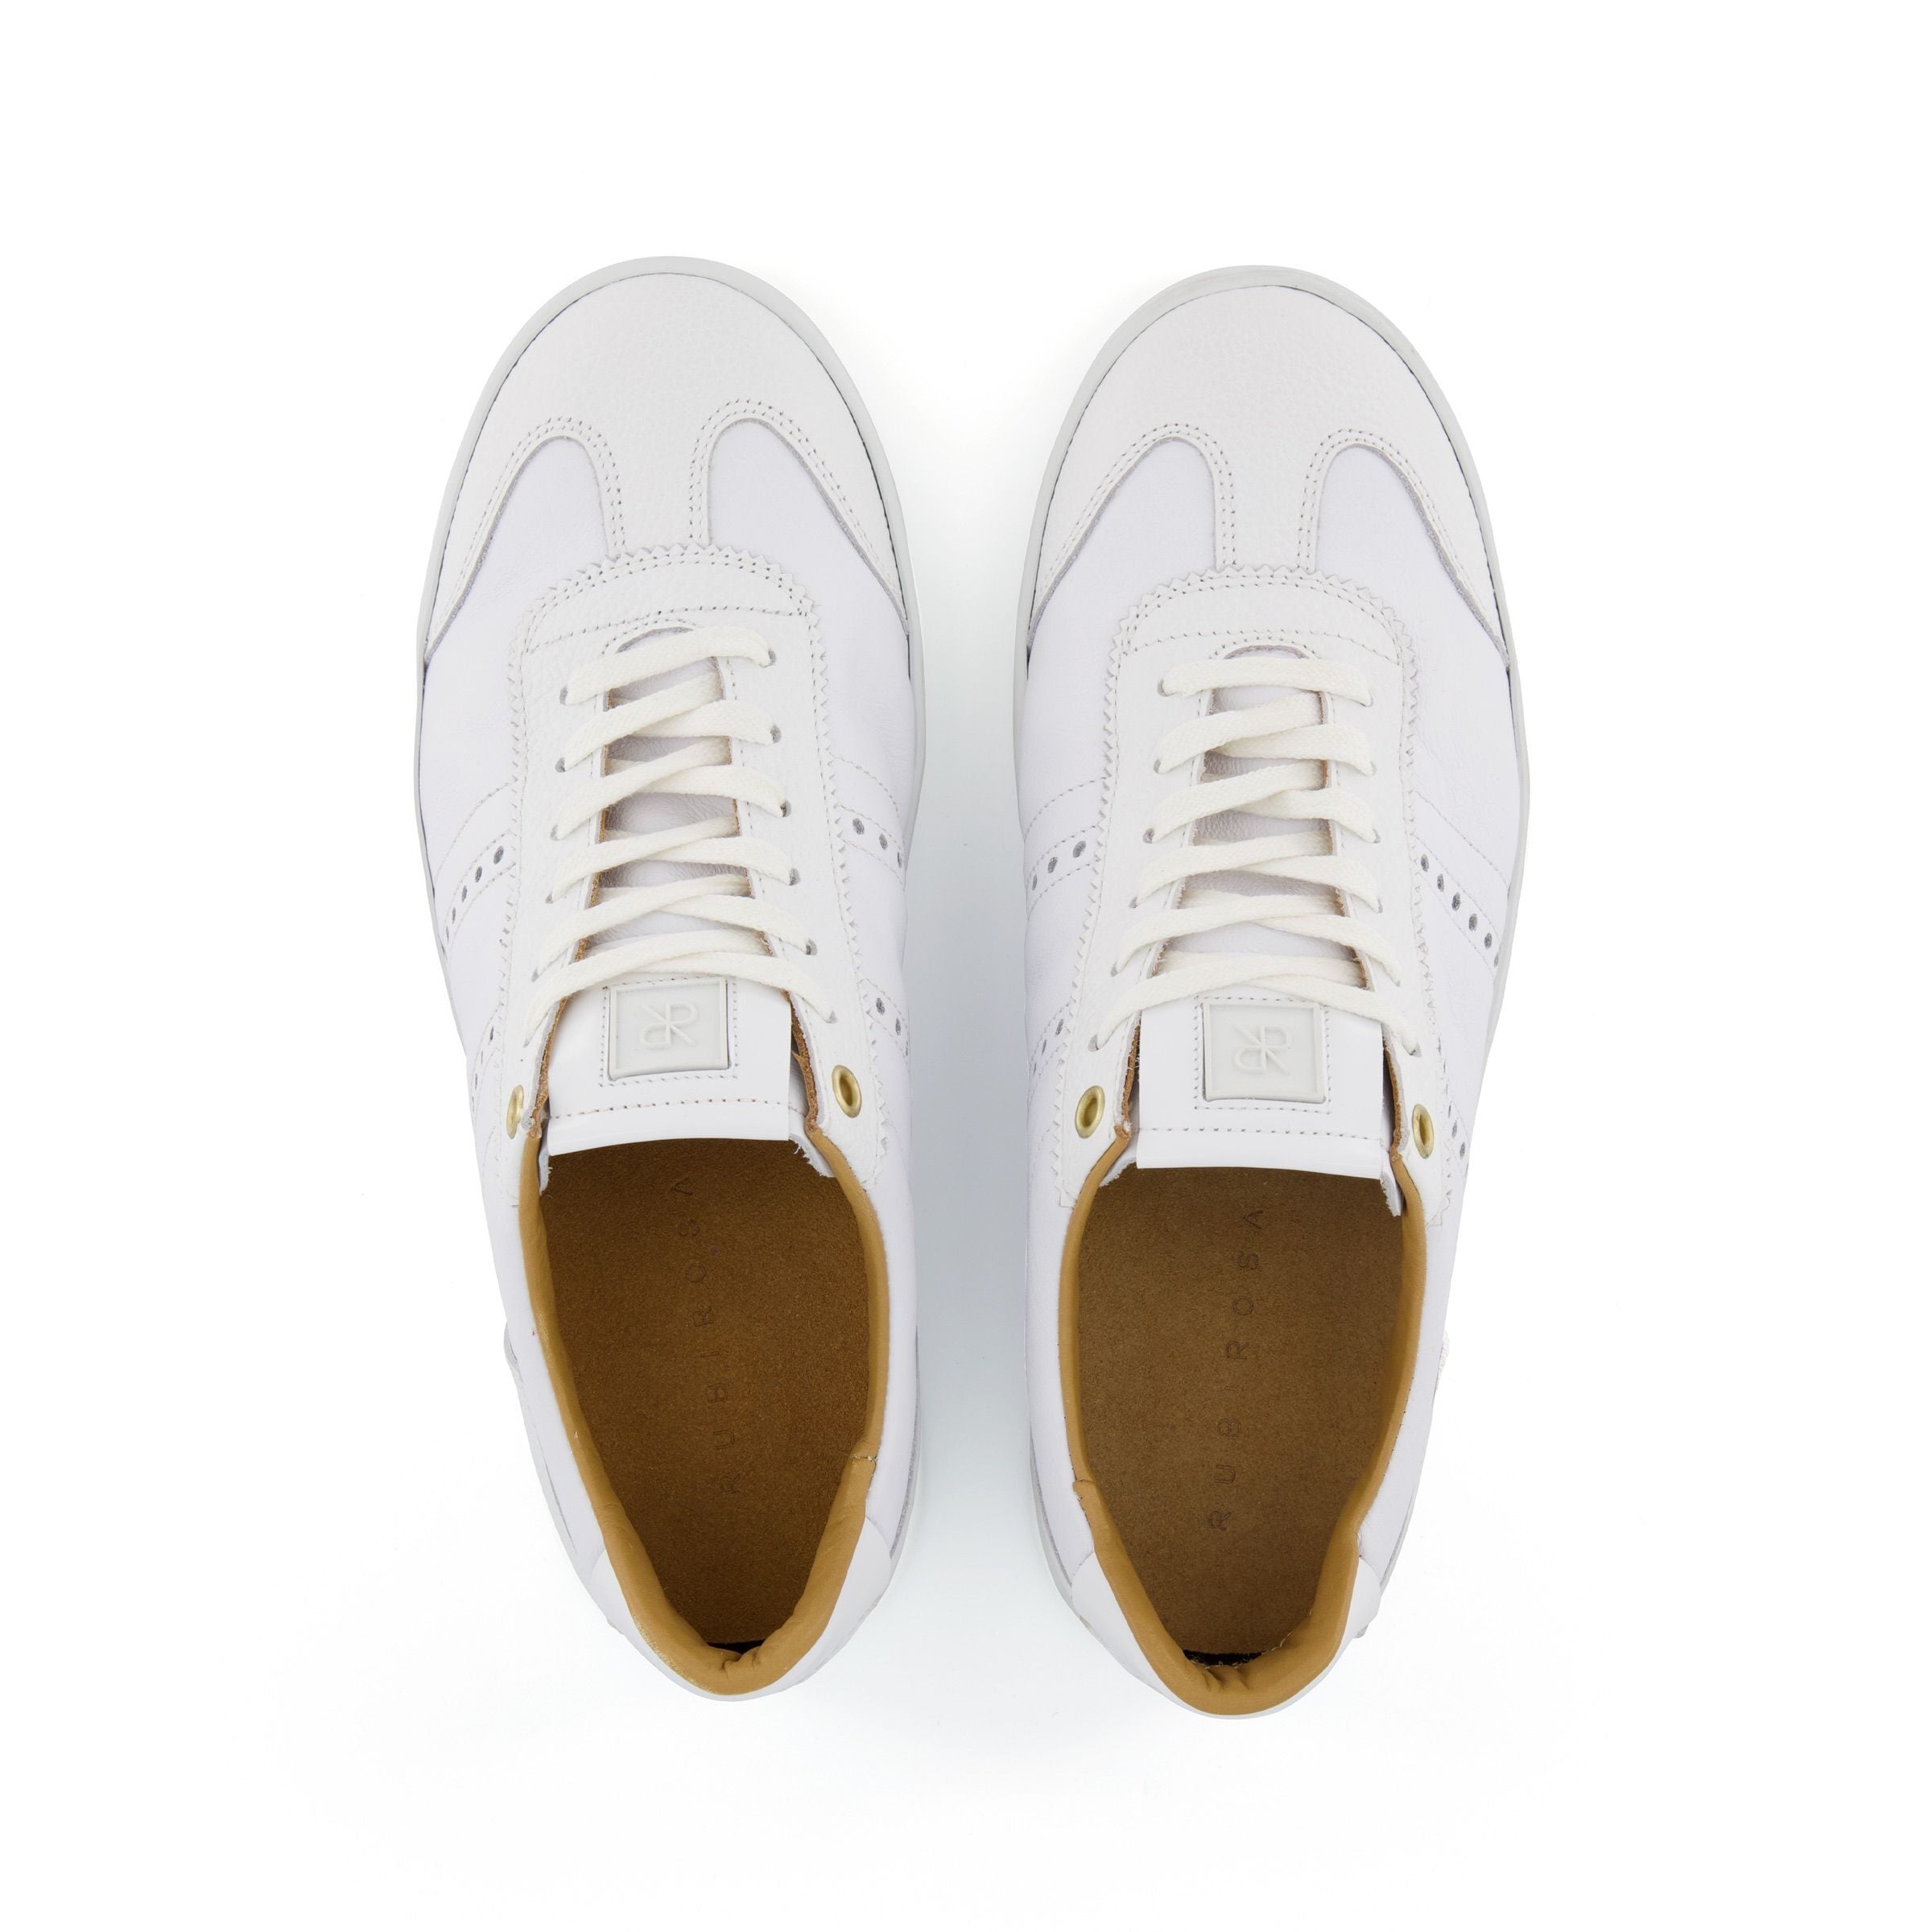 JUDY white CL03 men’s leather sneakers